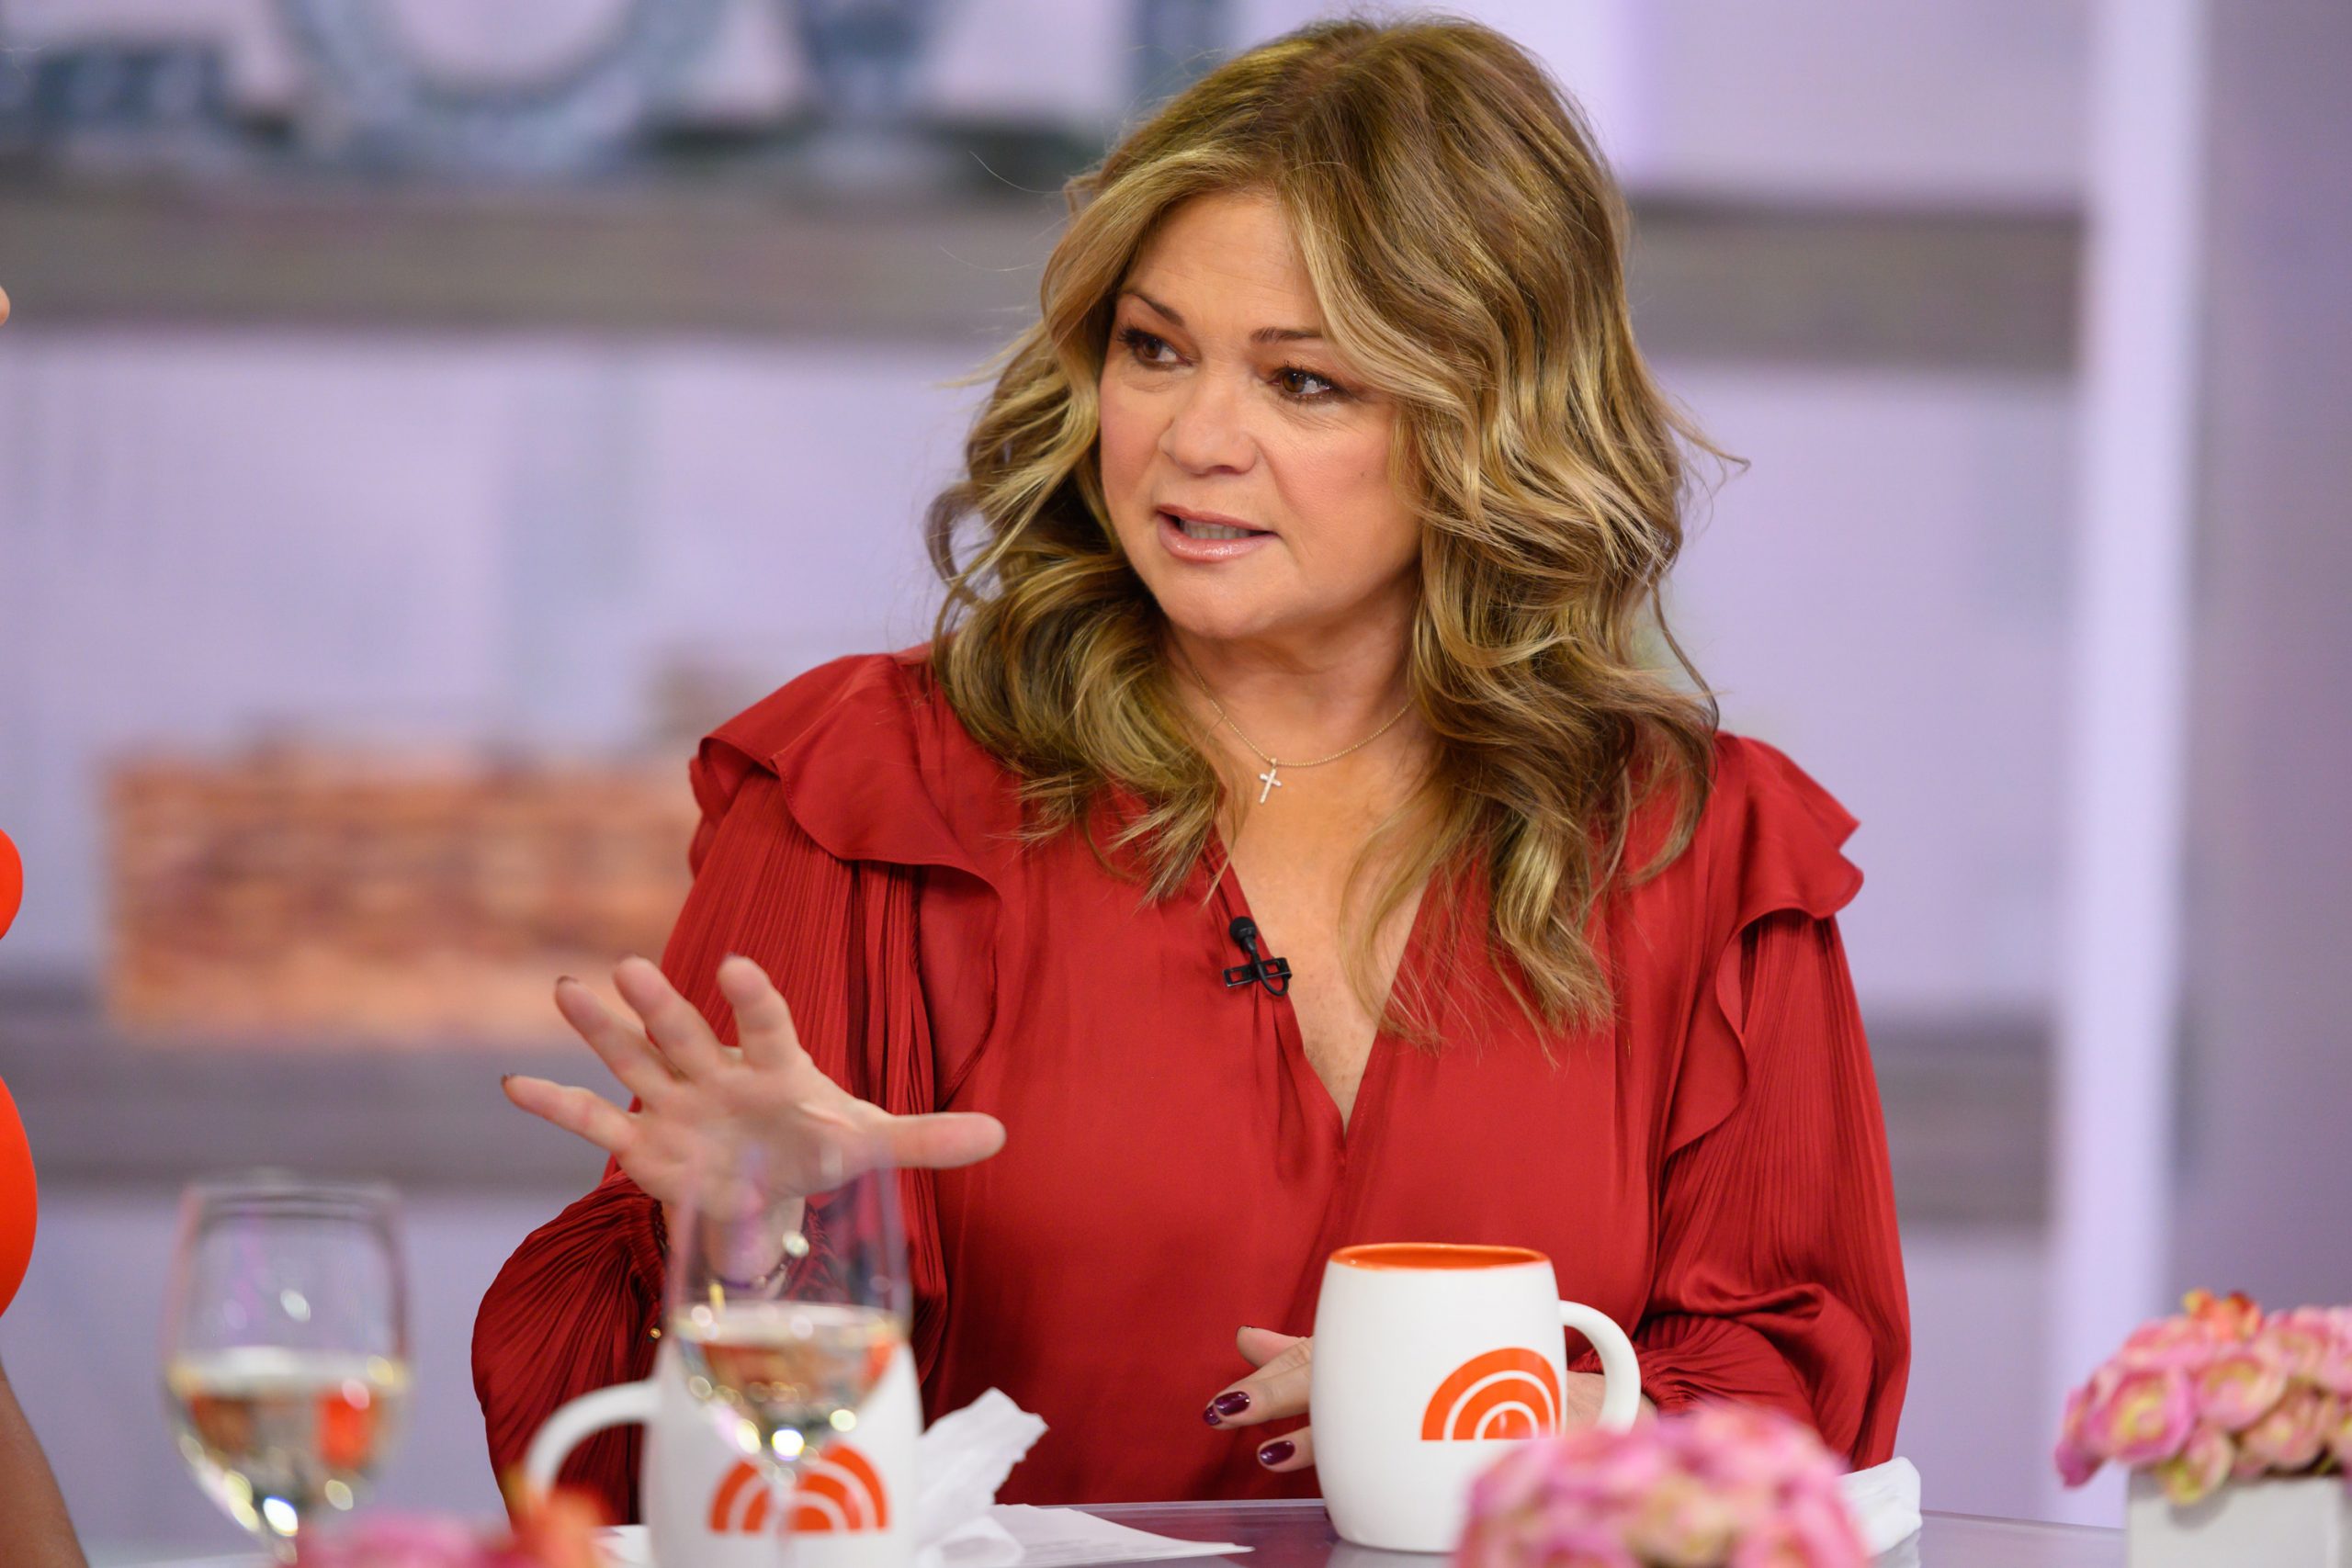 Valerie Bertinelli Is Eager For Her Book's Publicity Tour 'I